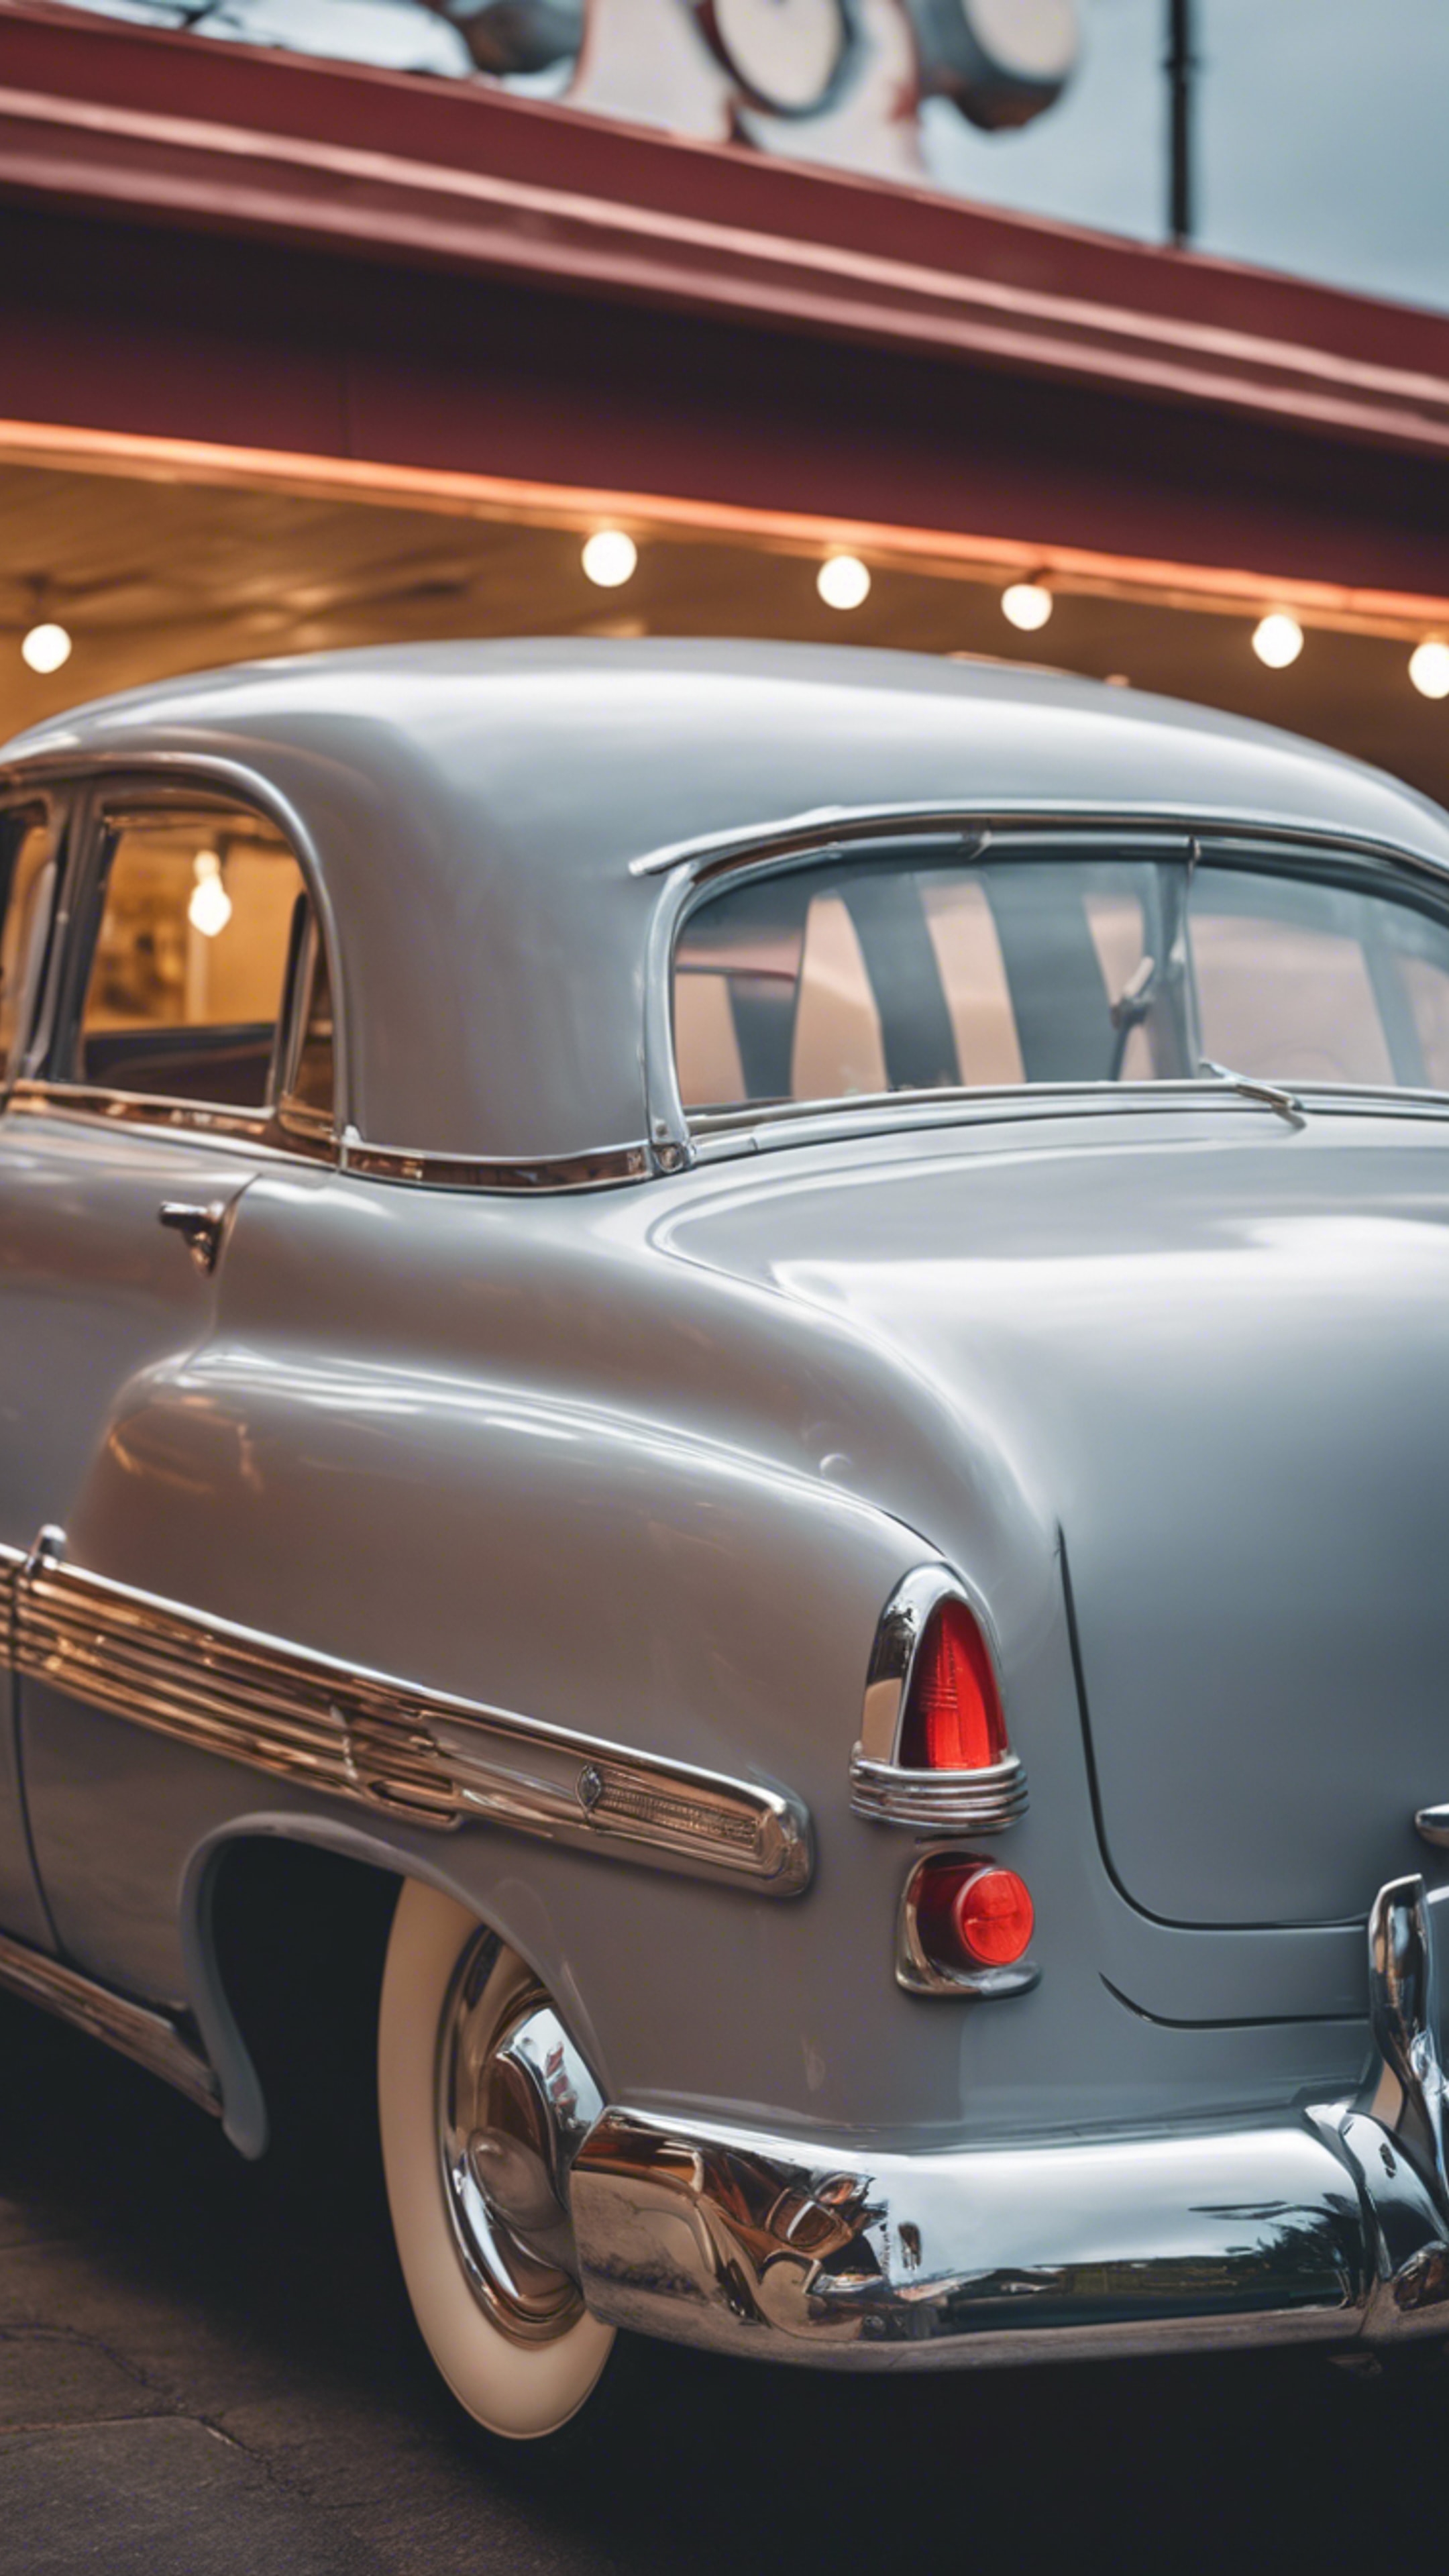 A vintage 1950s car, painted in light gray, parked outside a quirky roadside diner. Wallpaper[6f1ad1f93eb7446a85d1]